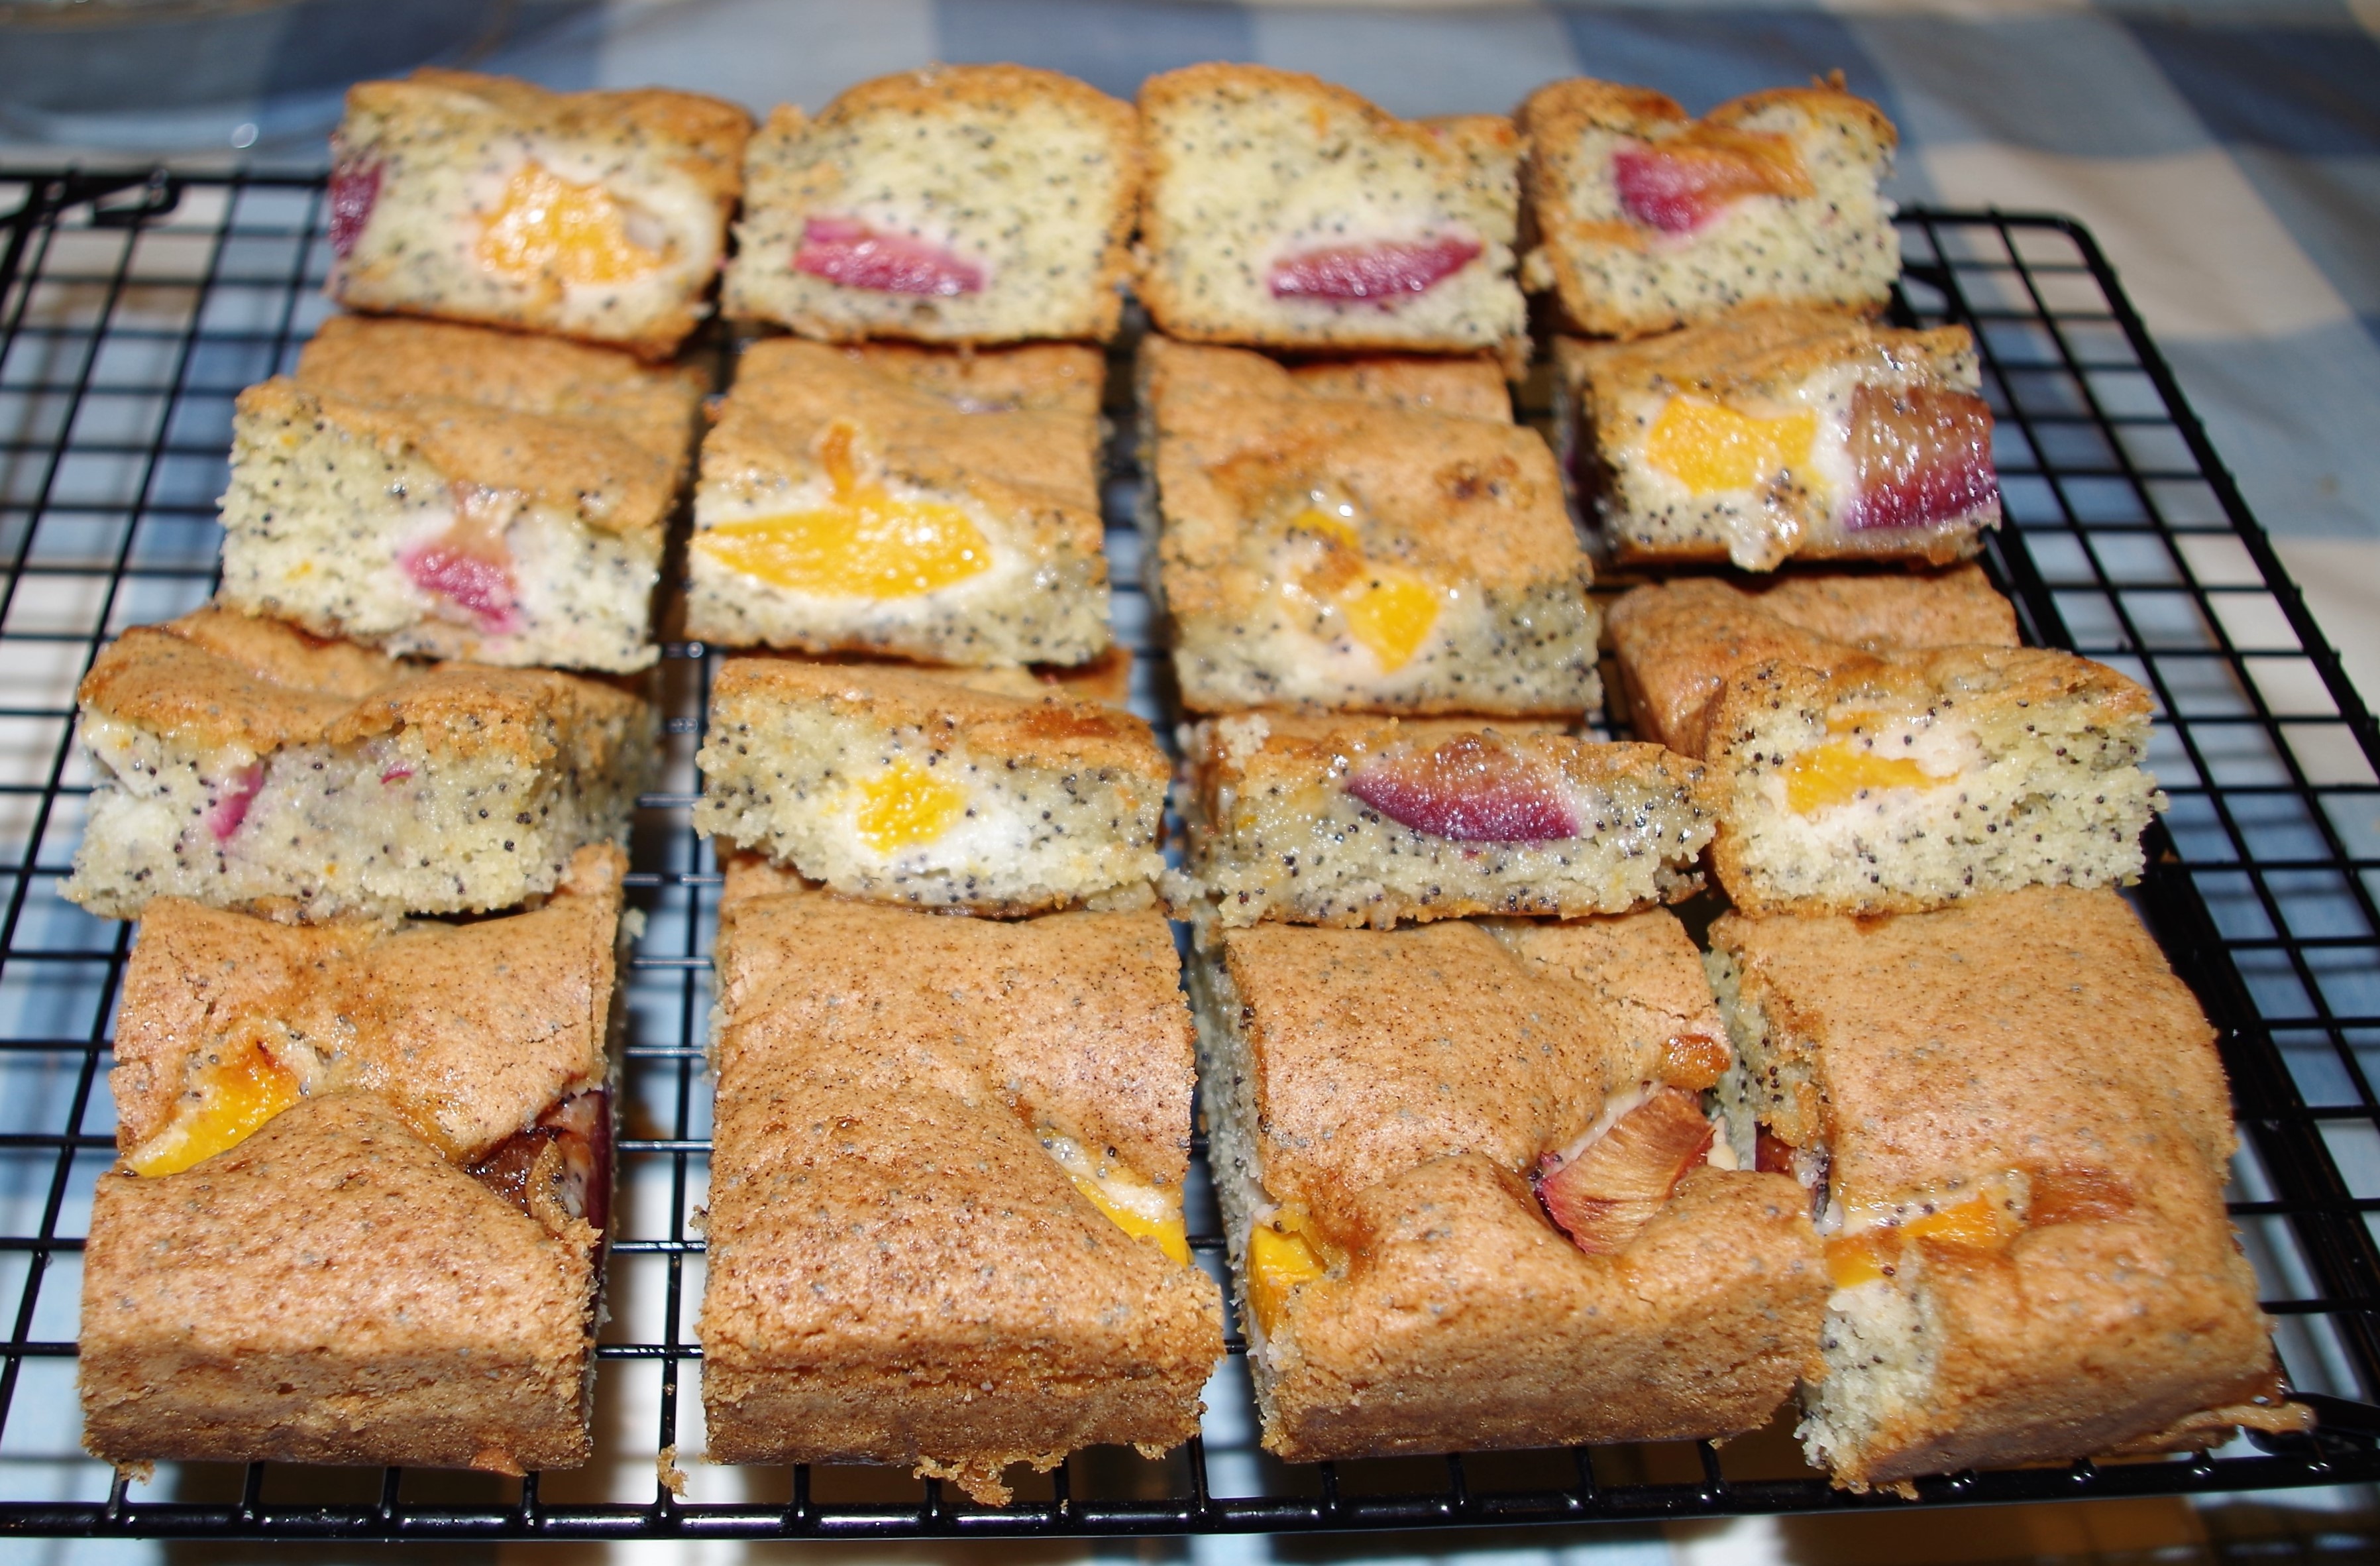 imgp4245 sat 5th jan - apricot, plum & poppy seed tray bake for citp meeting - 8